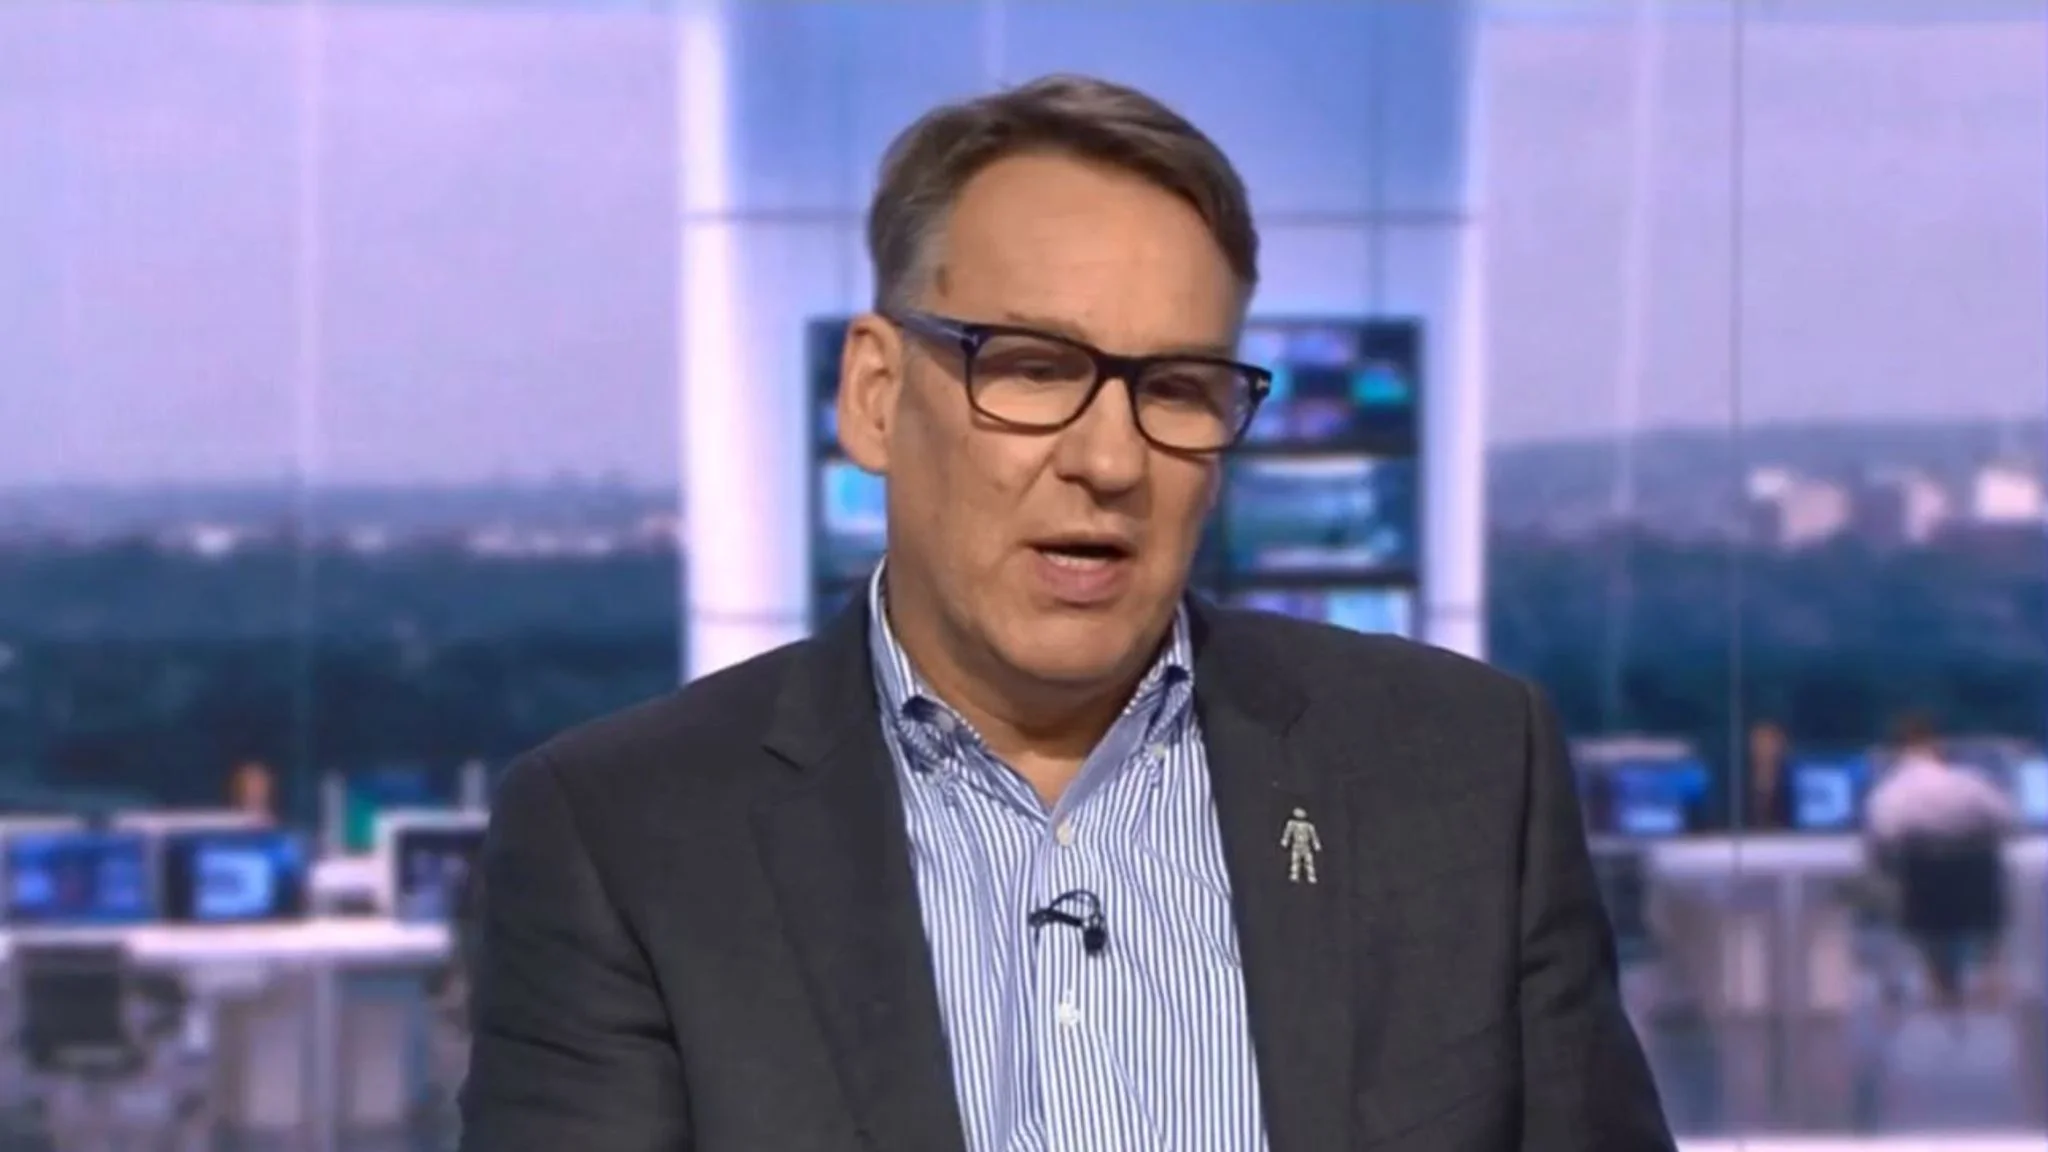 Paul Merson Sends Tottenham Apology After NLD Slaughter Claims